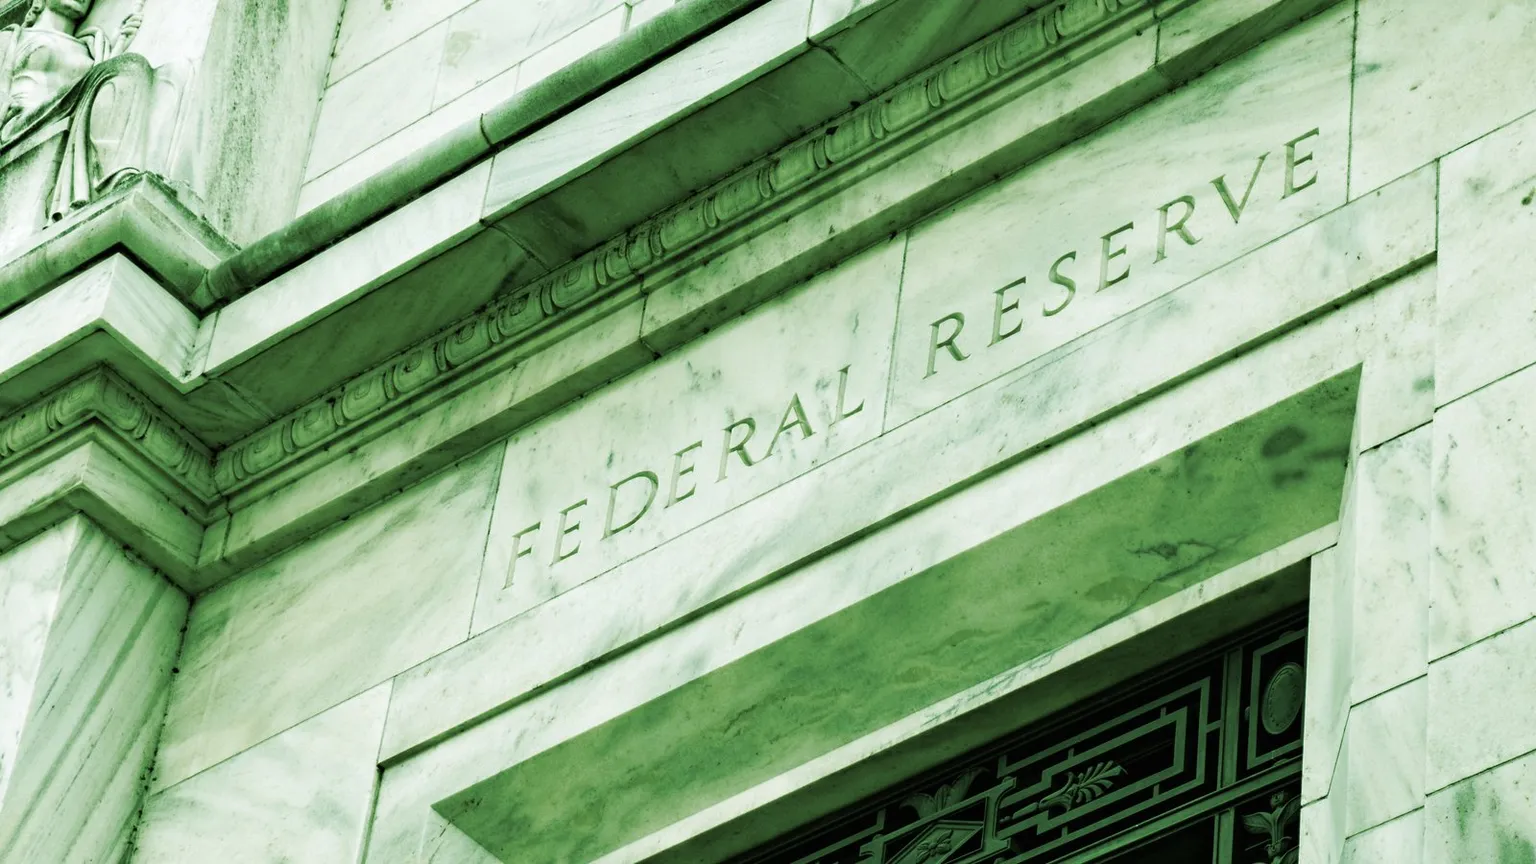 Facade on the Federal Reserve Building in Washington DC